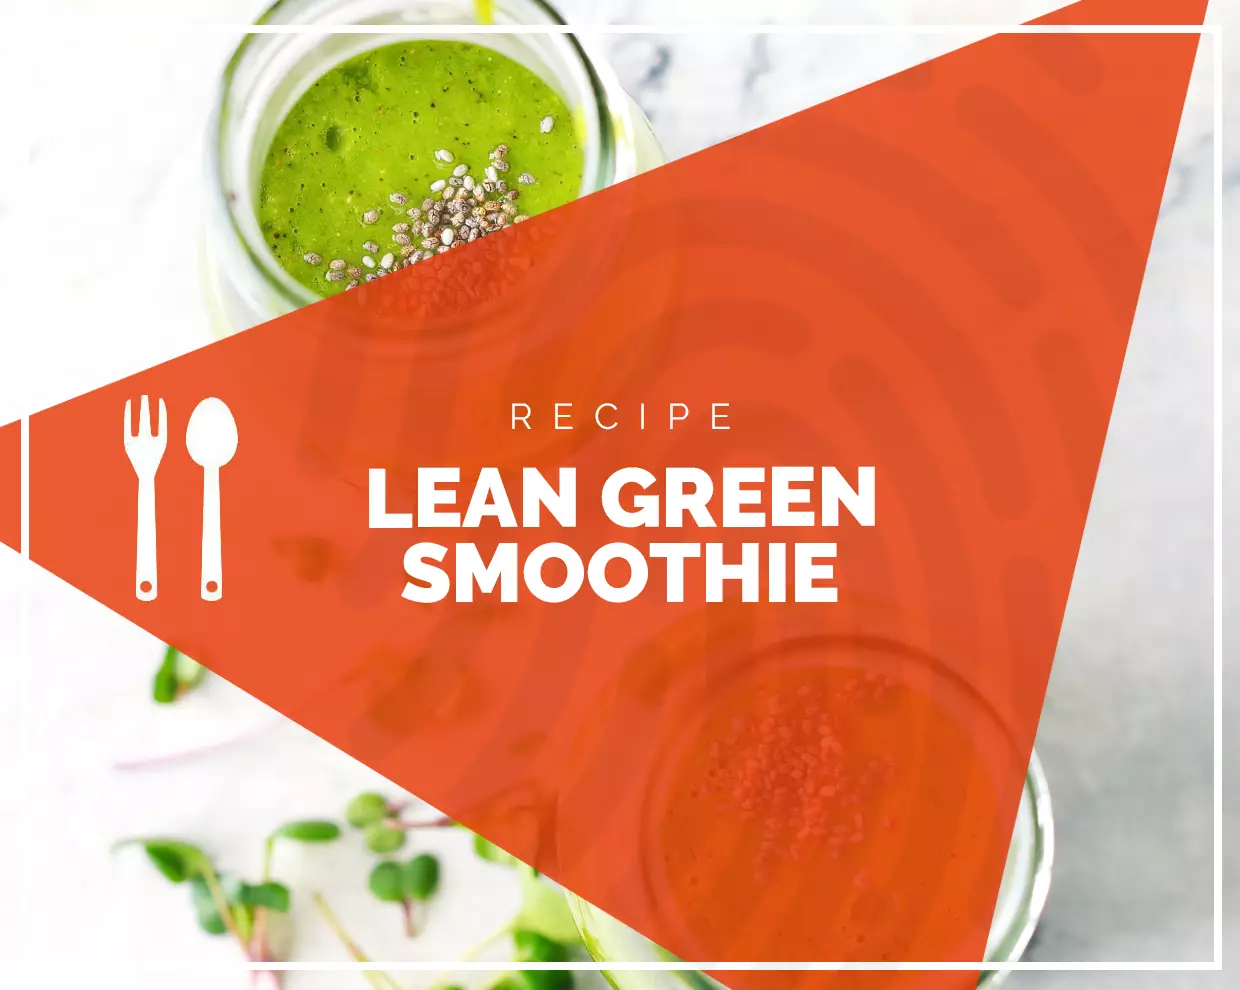 The Lean Green Smoothie